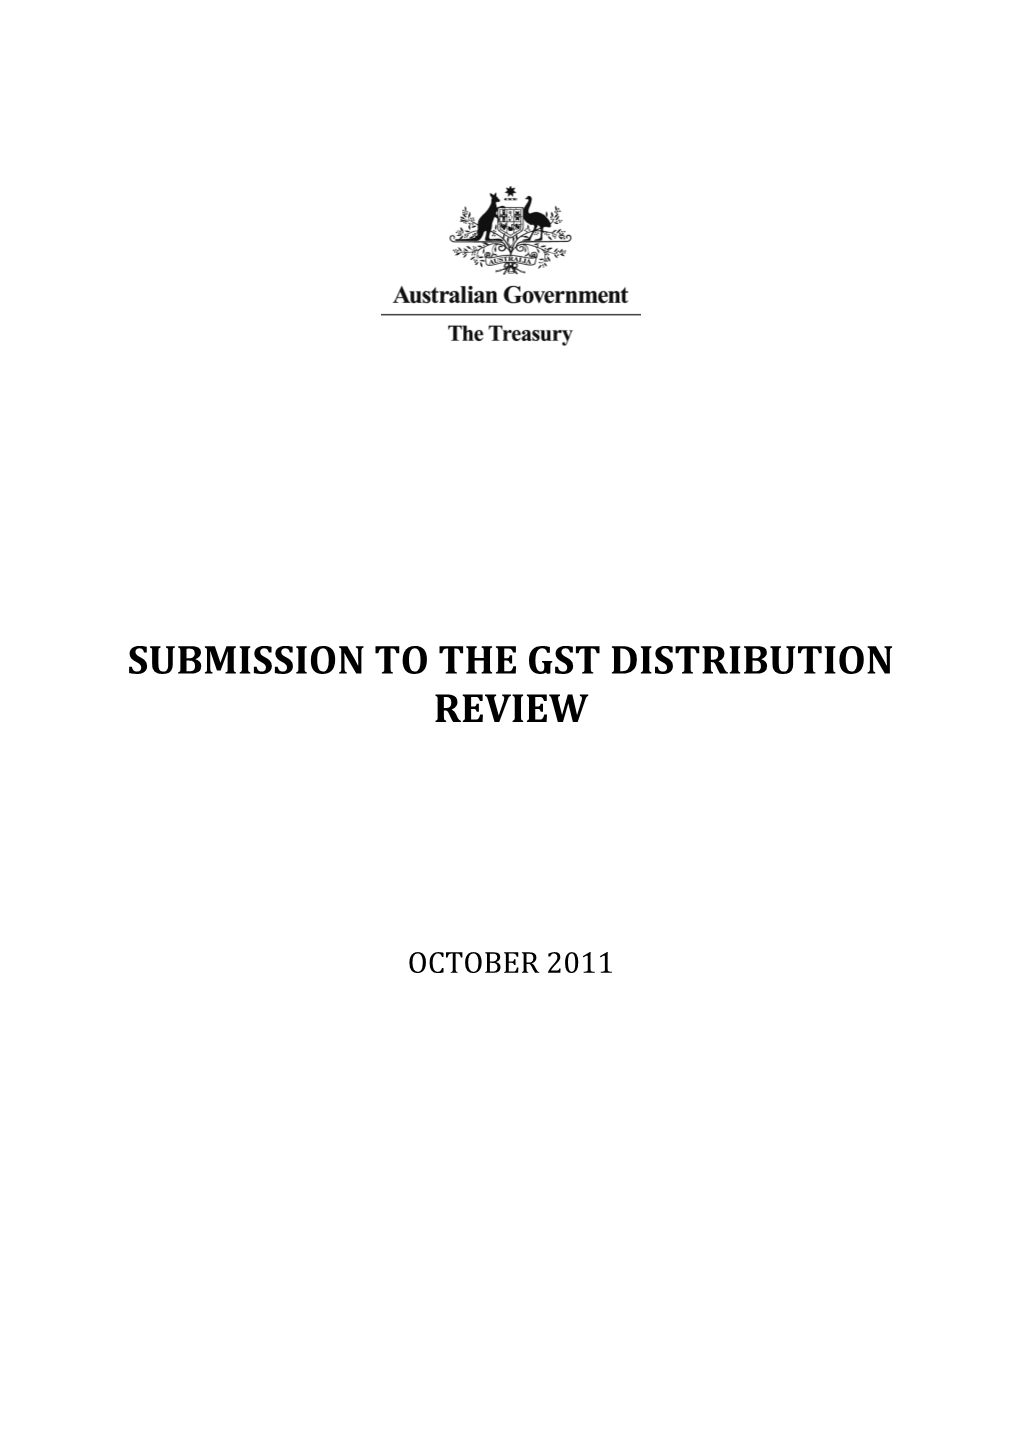 Submission to the Gst Distribution Review